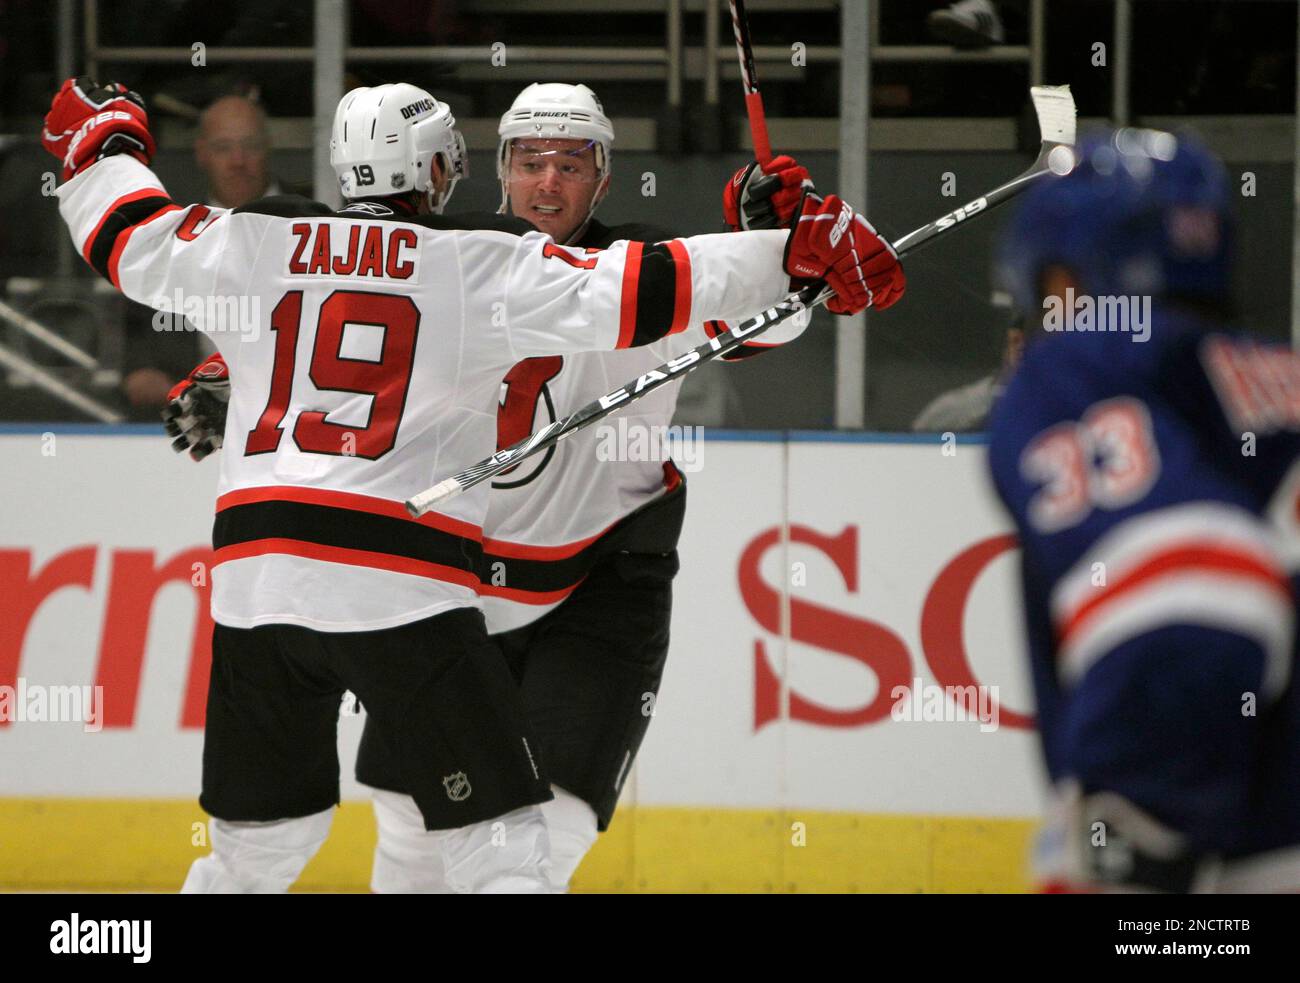 Why the NJ Devils are looking for Travis Zajac to return